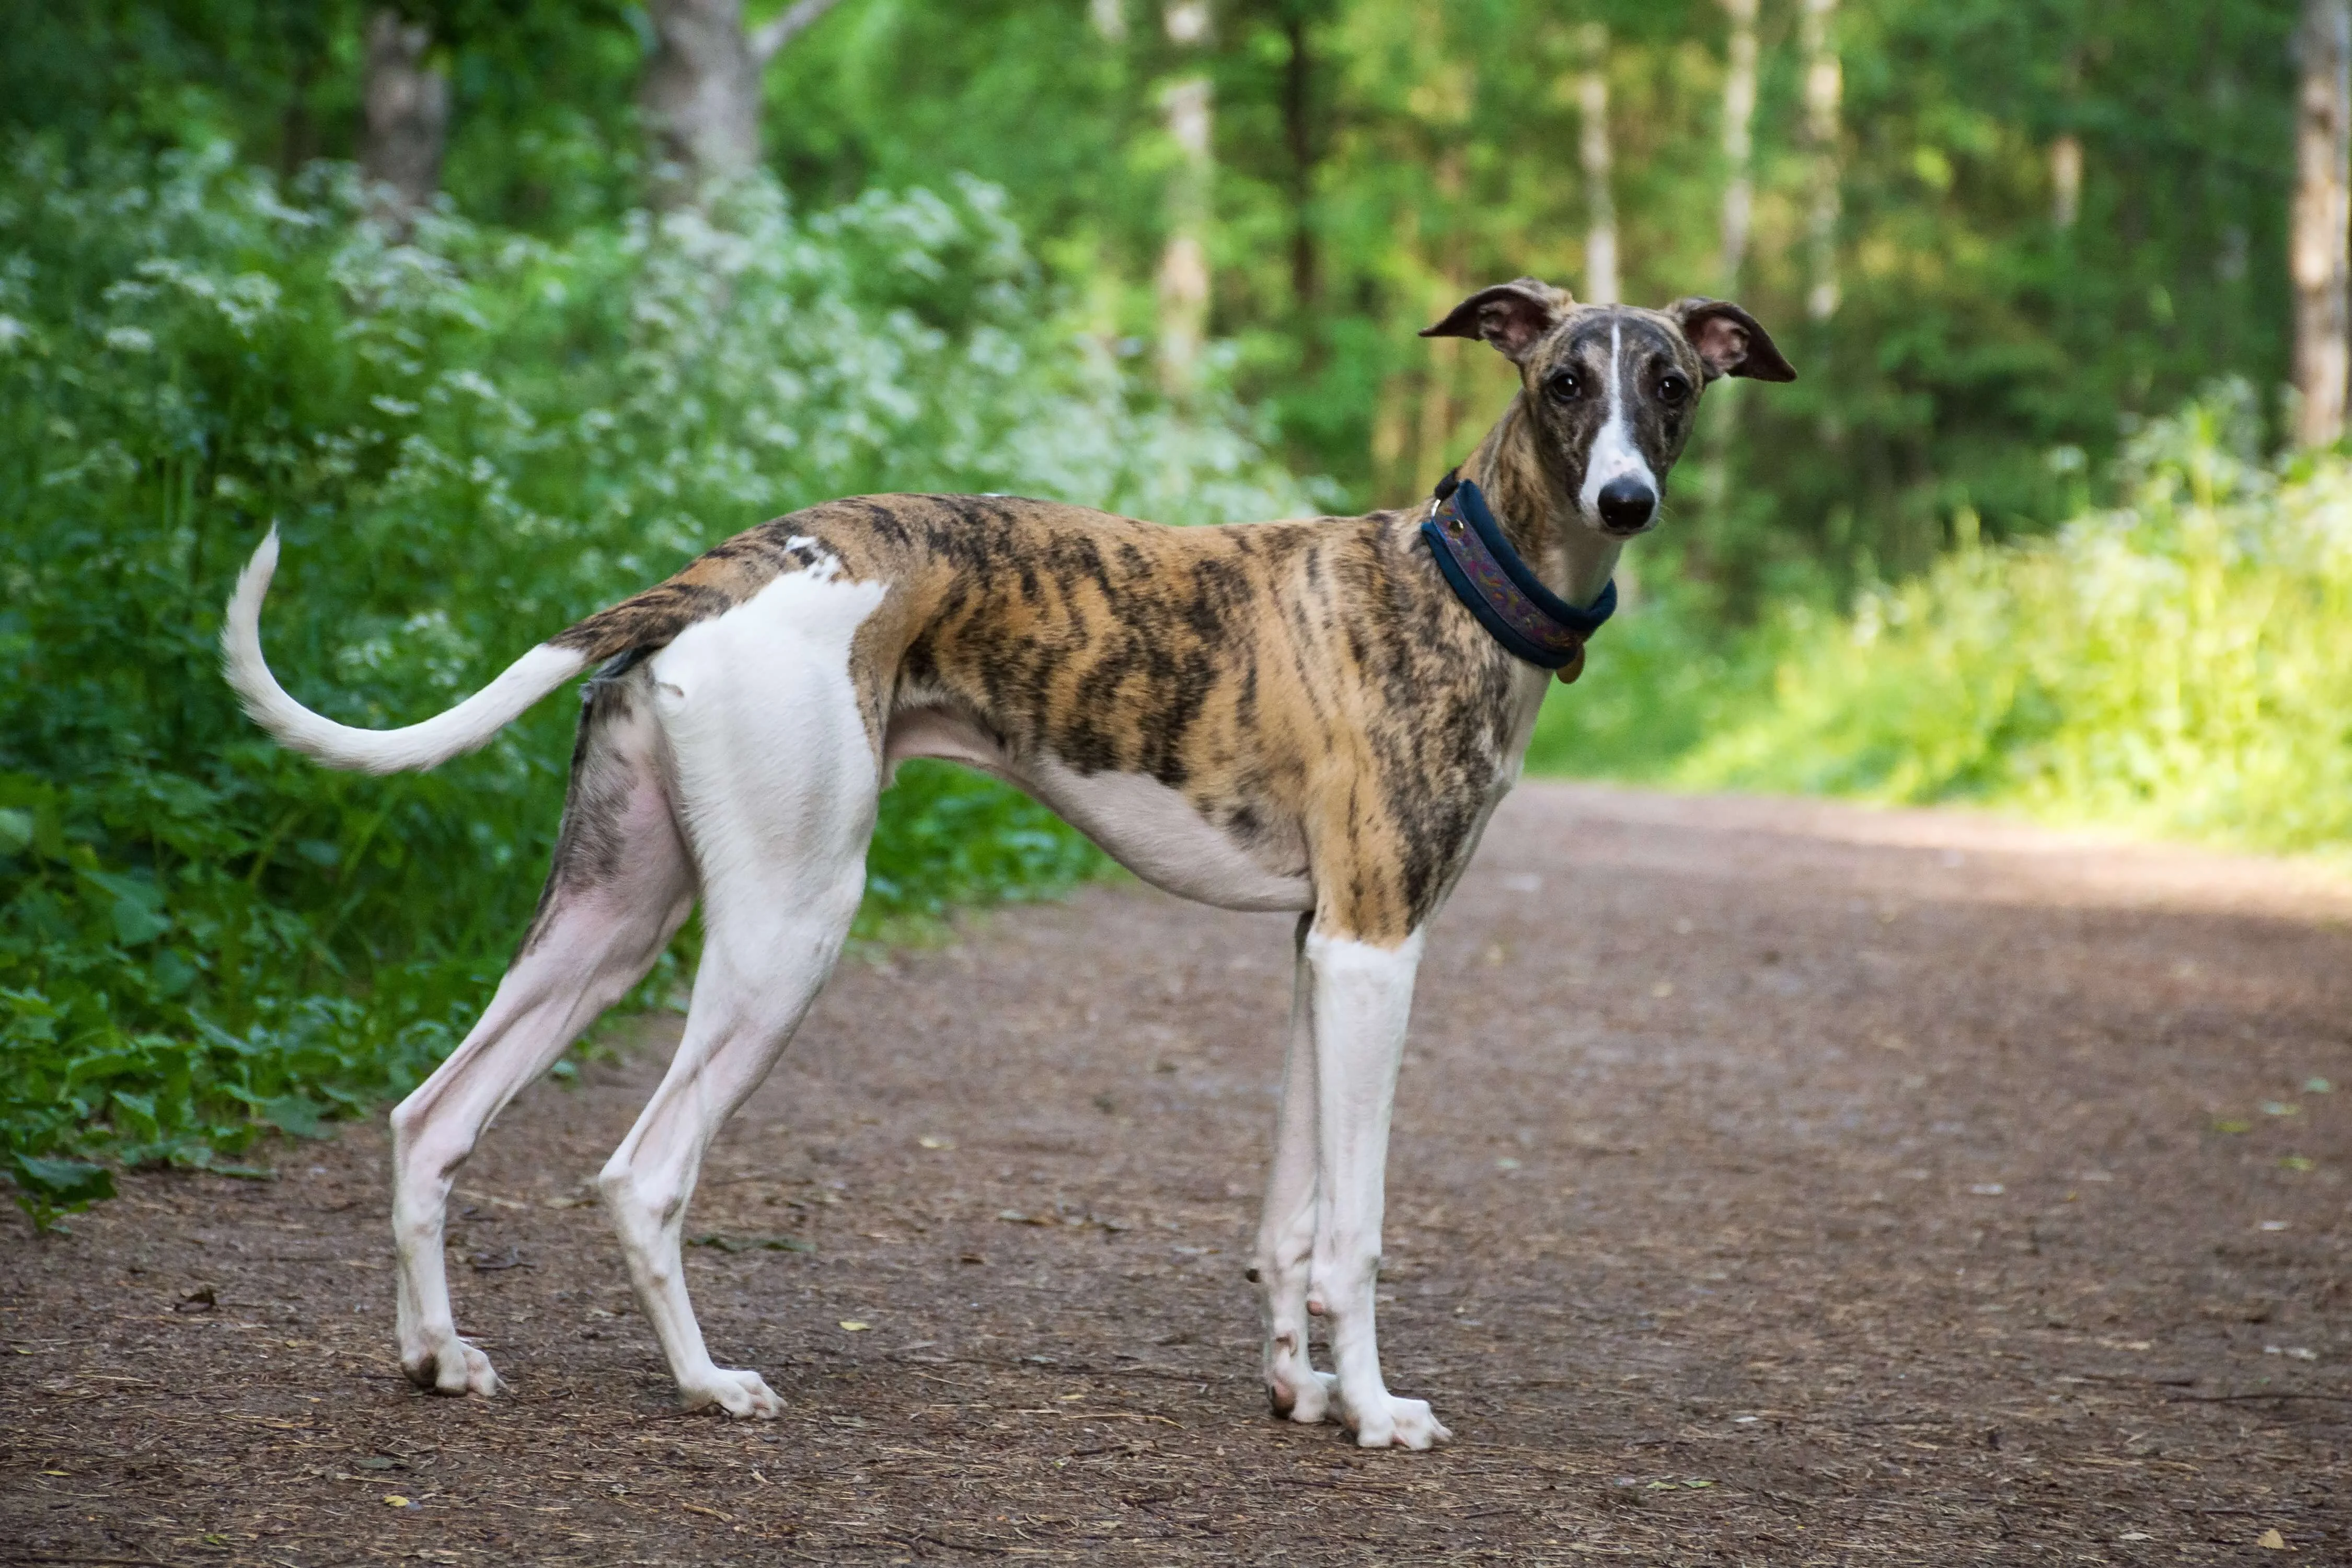 Greyhound dog standing on a mud path in a forest